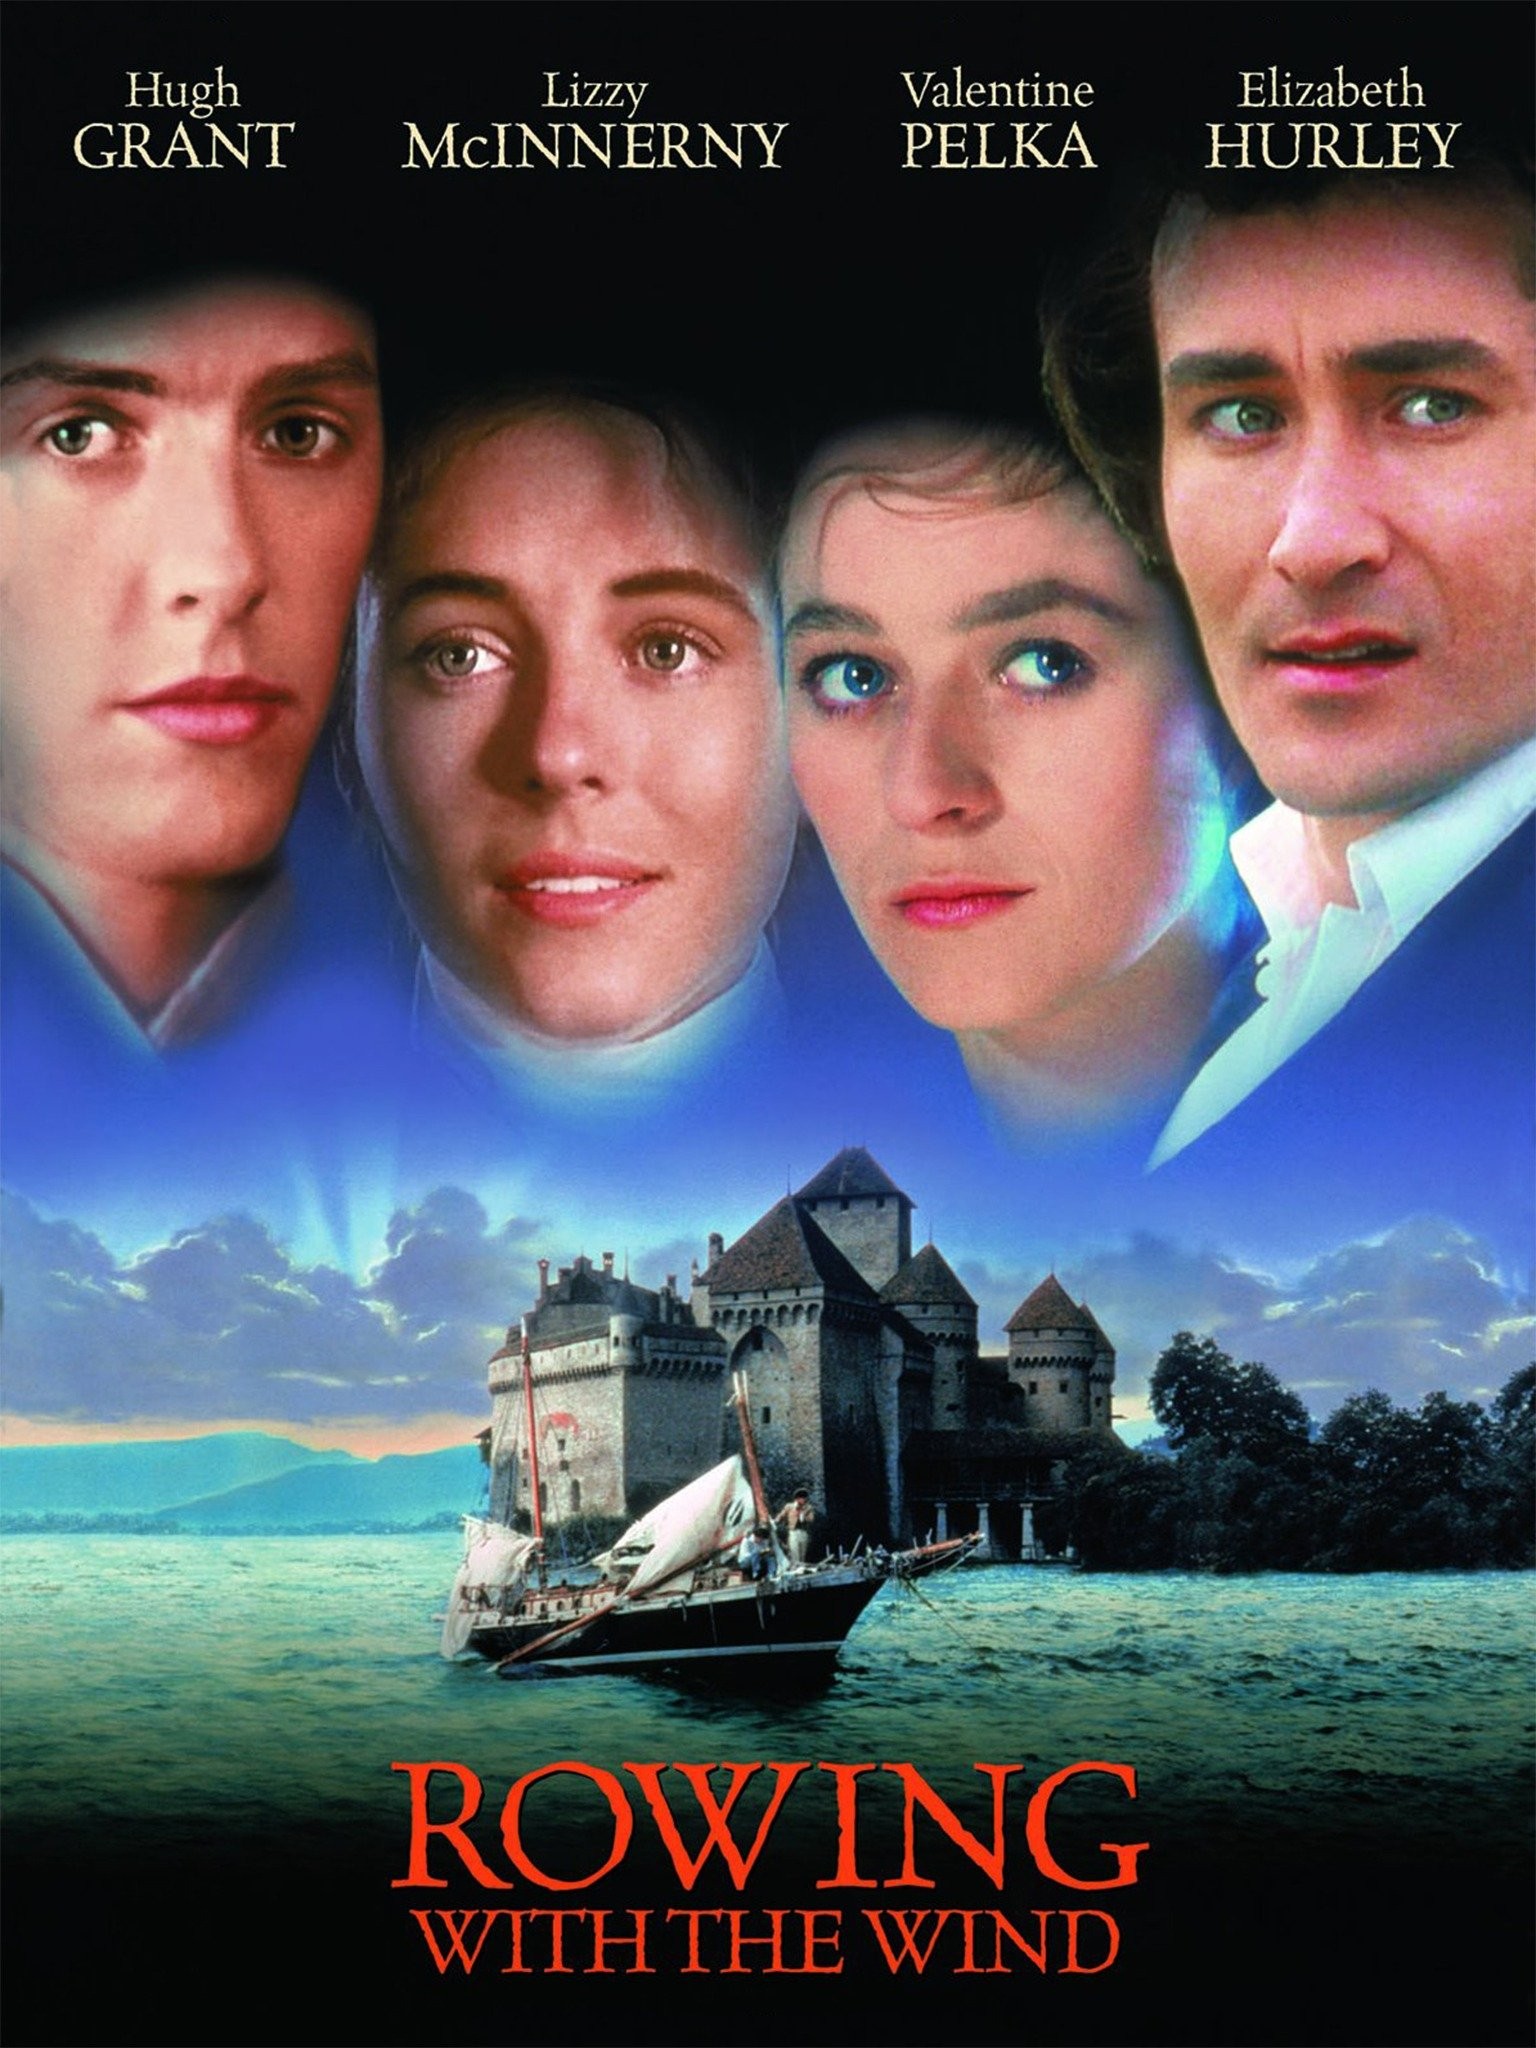 Rowing with the wind movie